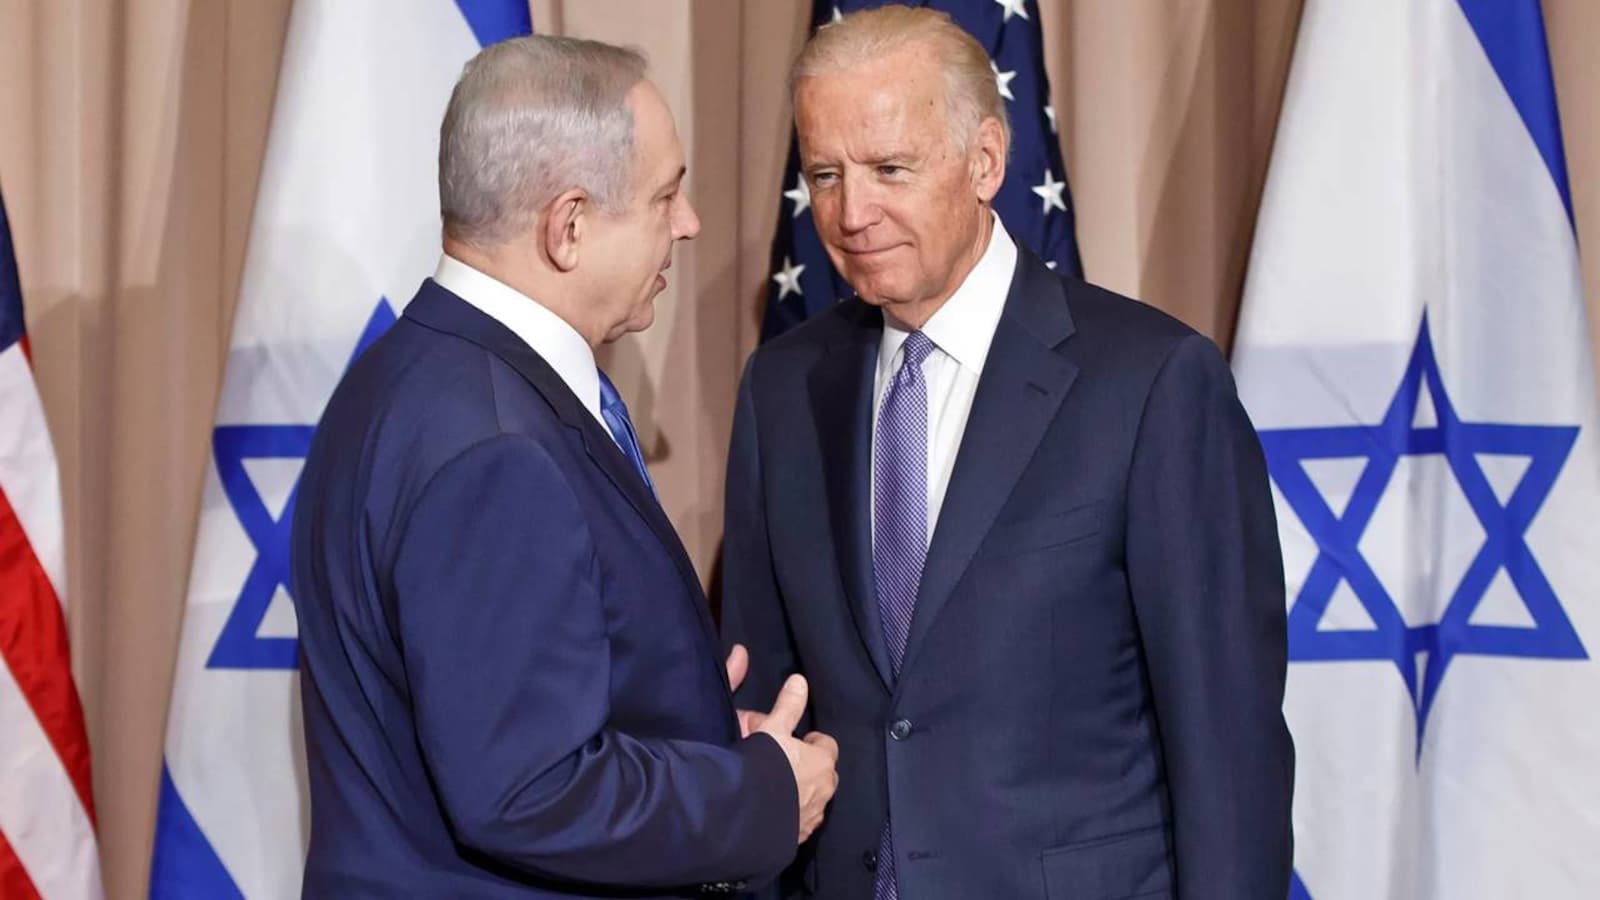 Will Netanyahu defeat Biden in the November US presidential elections?